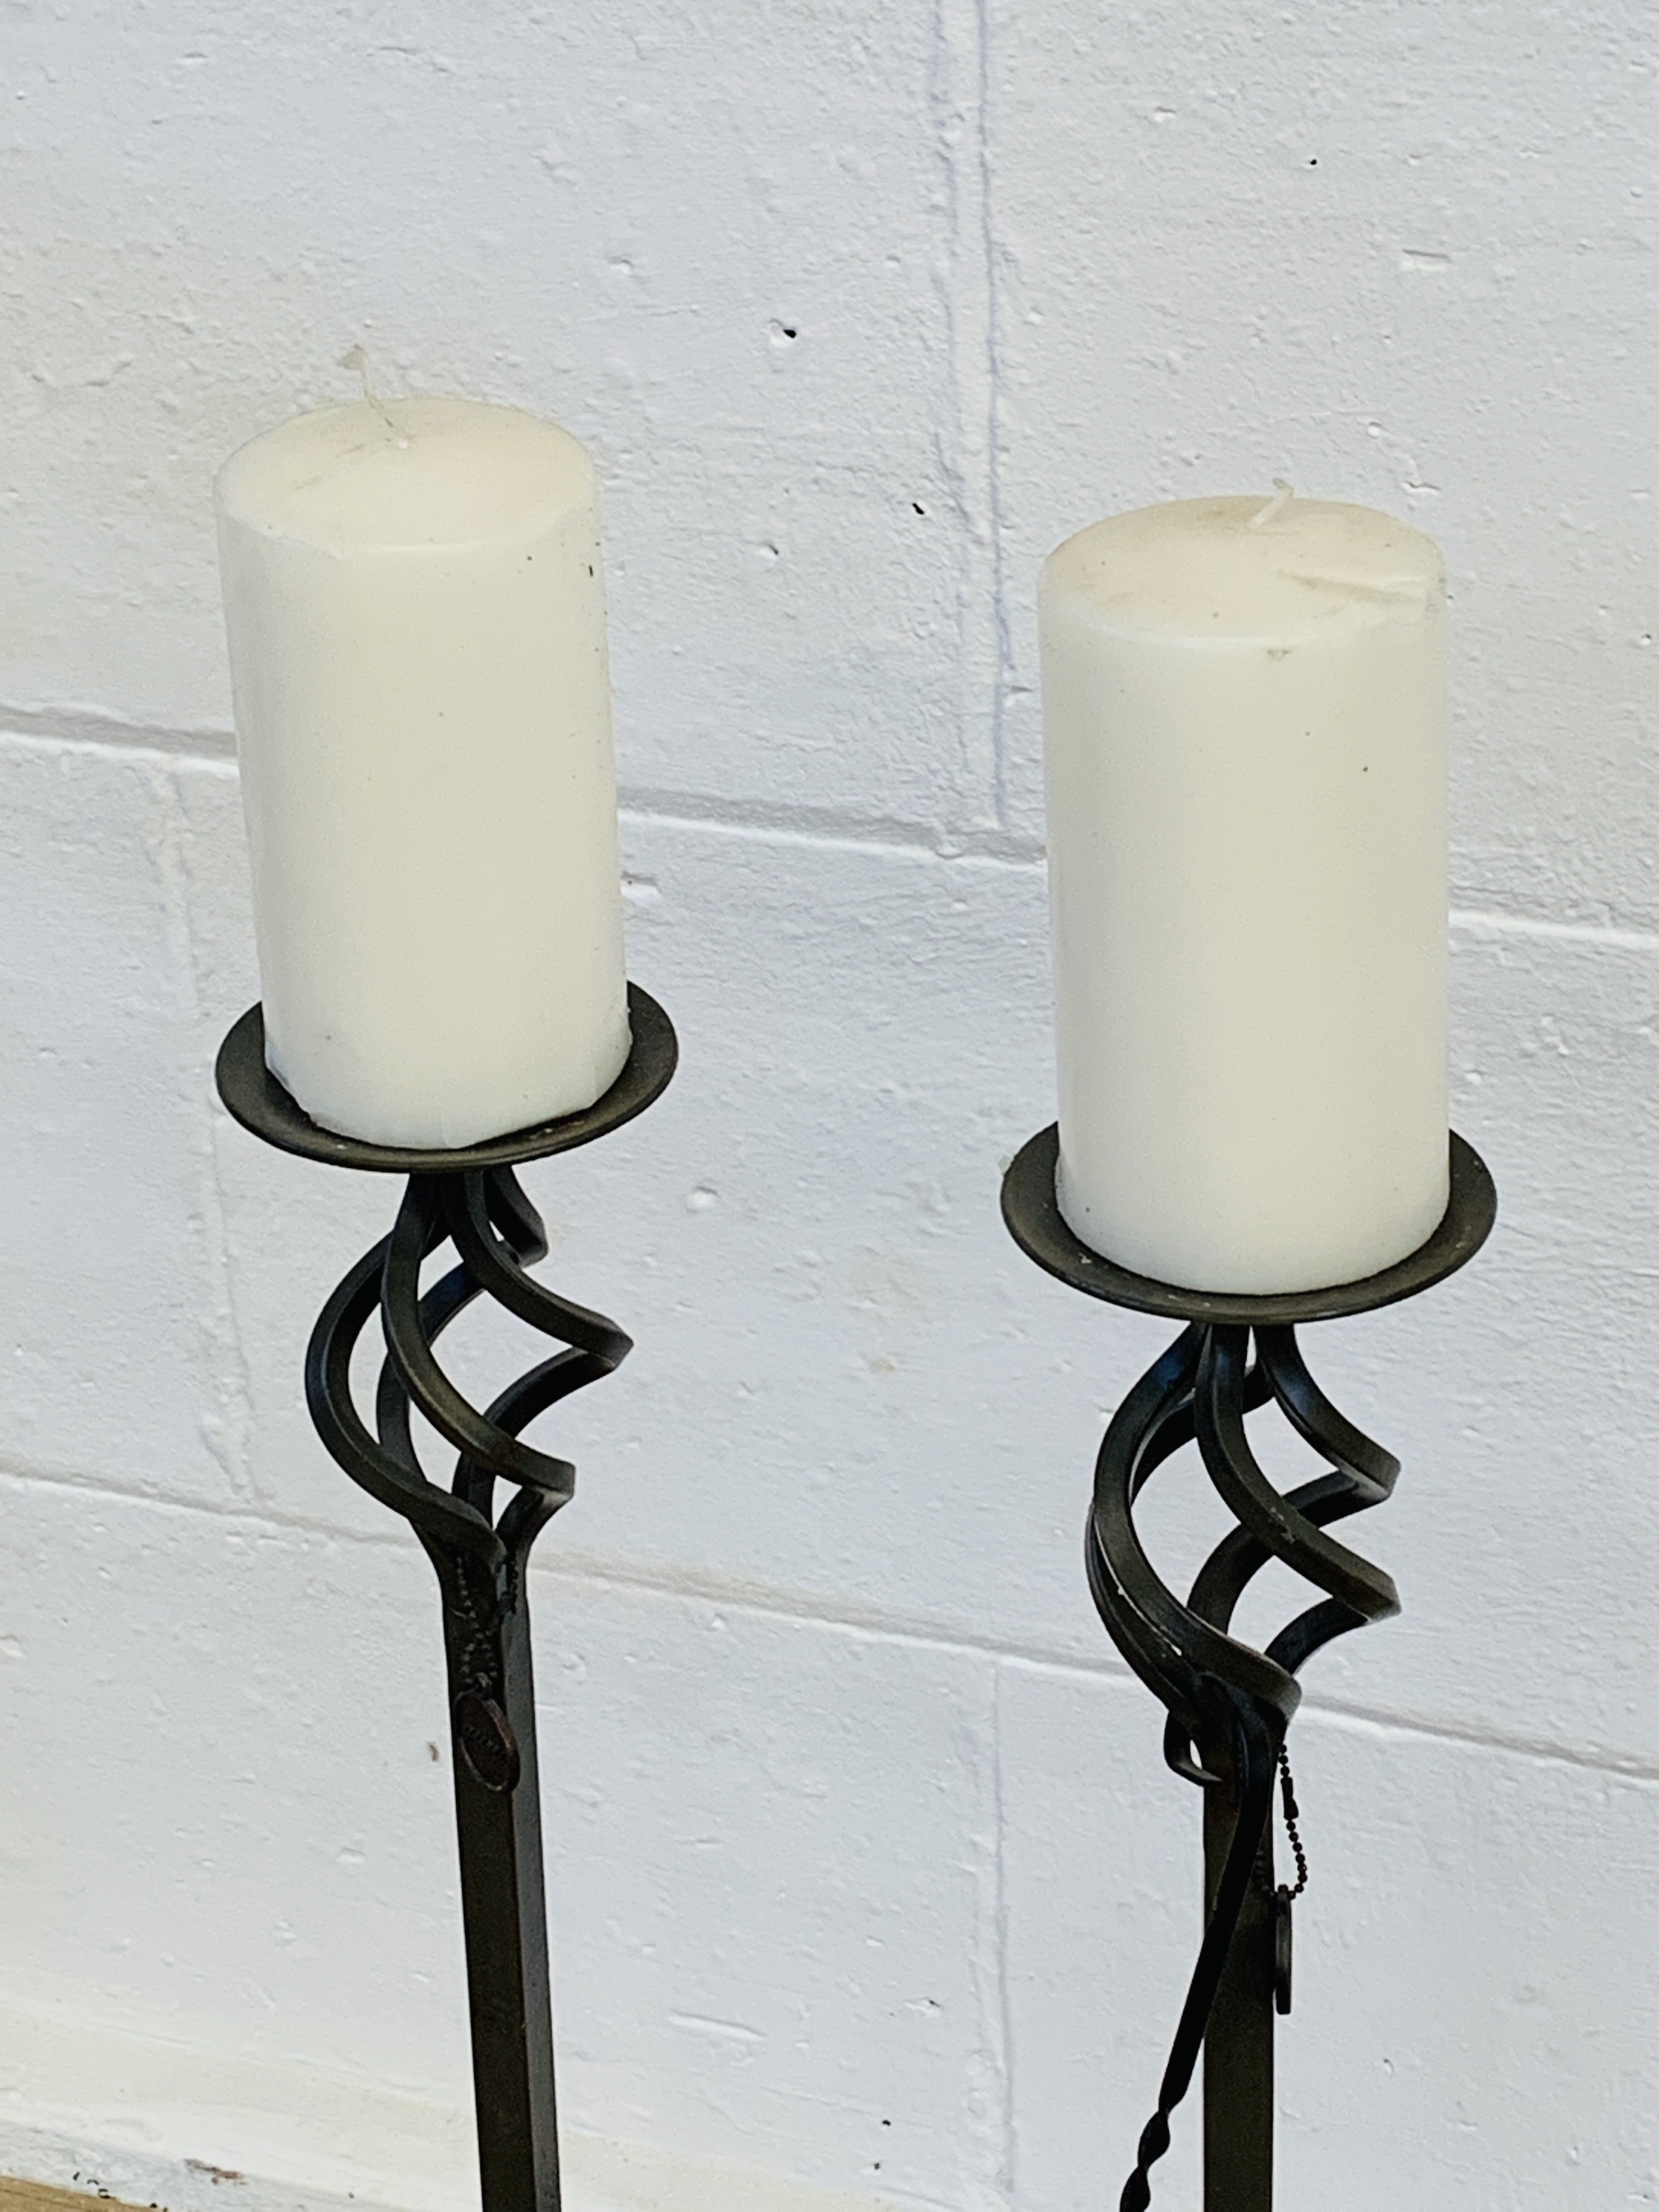 Pair of cast metal candlesticks - Image 2 of 3